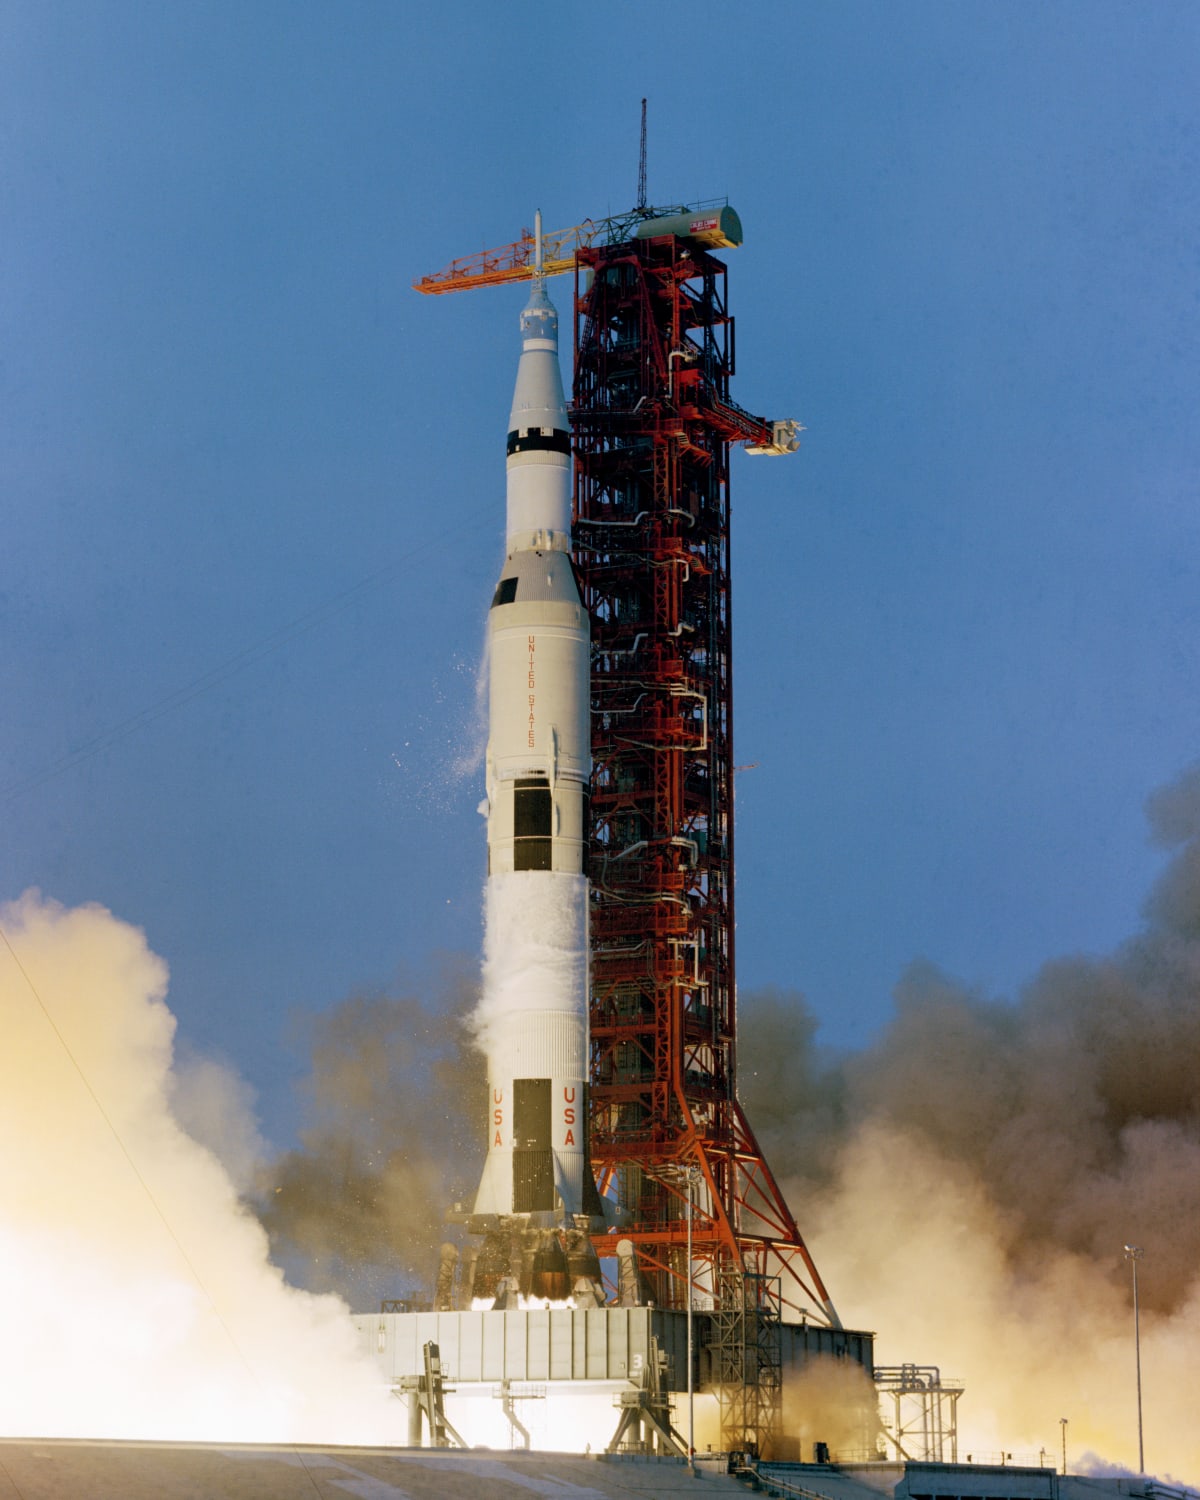 The Apollo 13 space vehicle is launched from Pad A Launch Complex 39, Kennedy Space Center, at 2:13 p.m. (EST), April 11, 1970